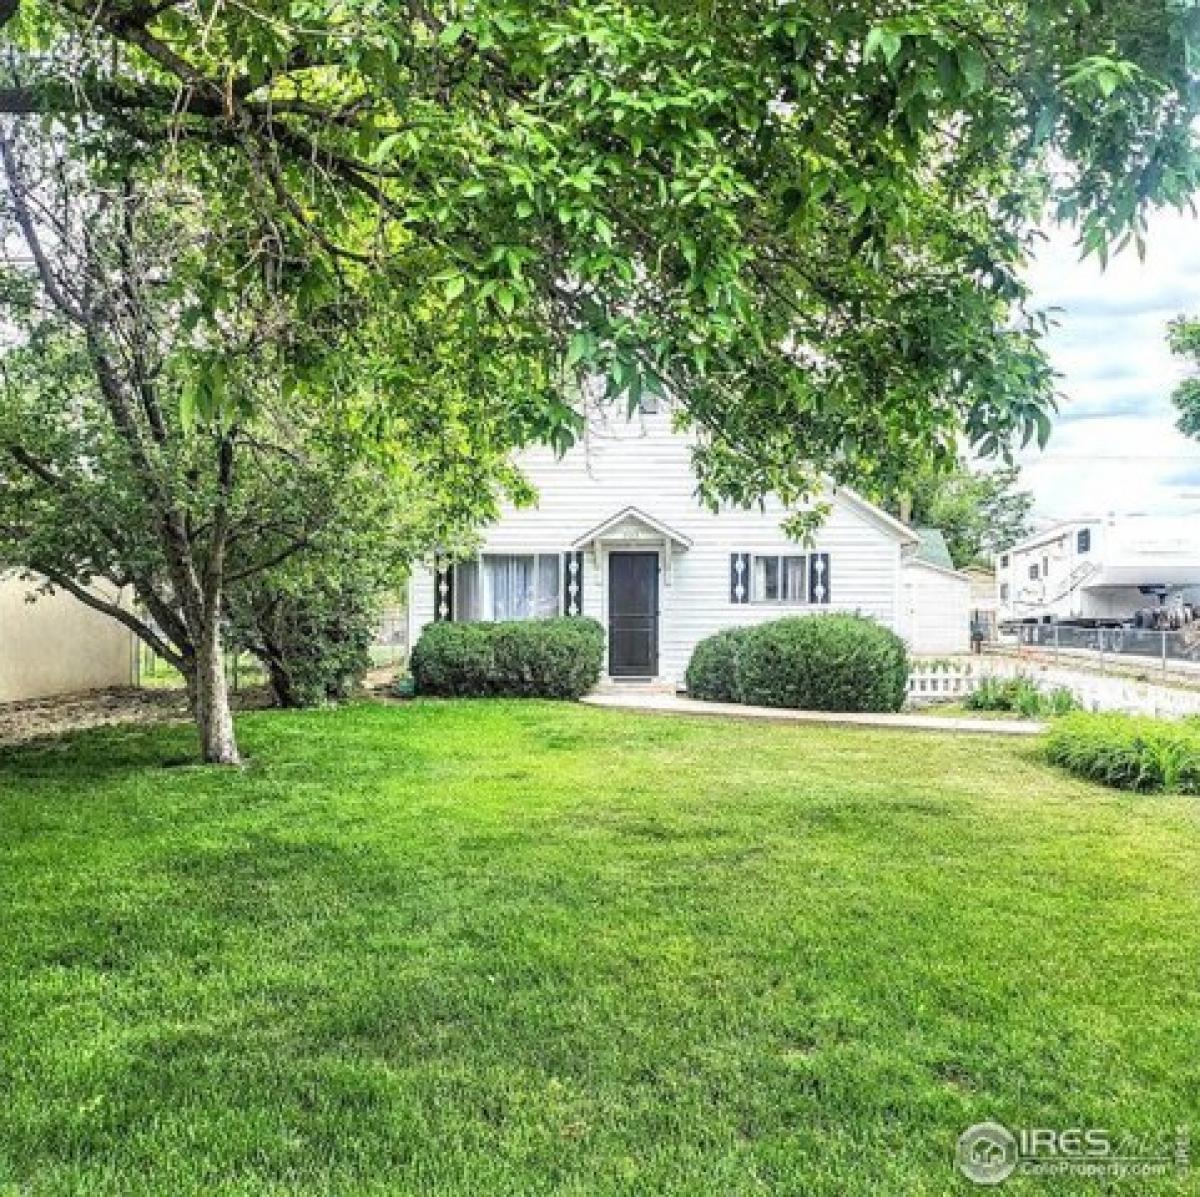 Picture of Home For Sale in Kersey, Colorado, United States